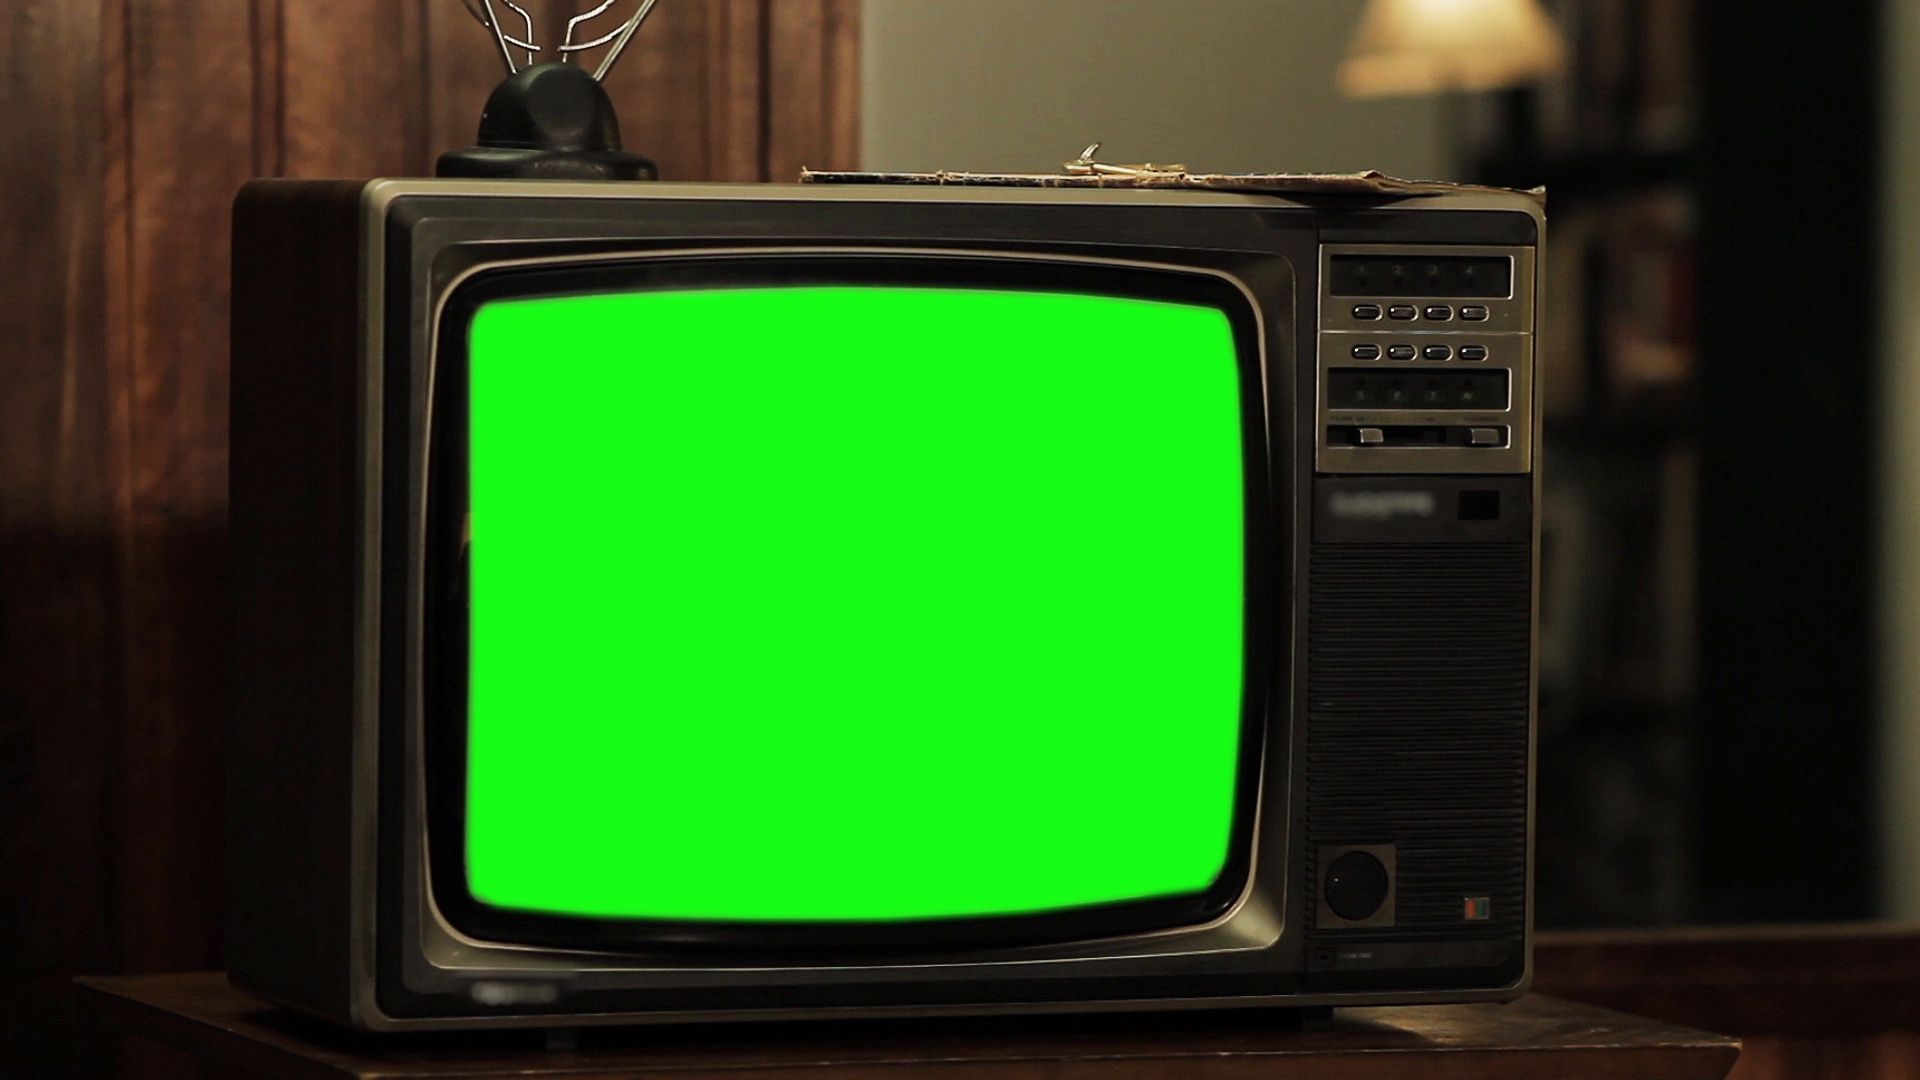 Old Tv Green Screen, Close Up. Stock Footage, #Screen#Green#Tv#Footage. Greenscreen, Old Tv, Filters For Picture